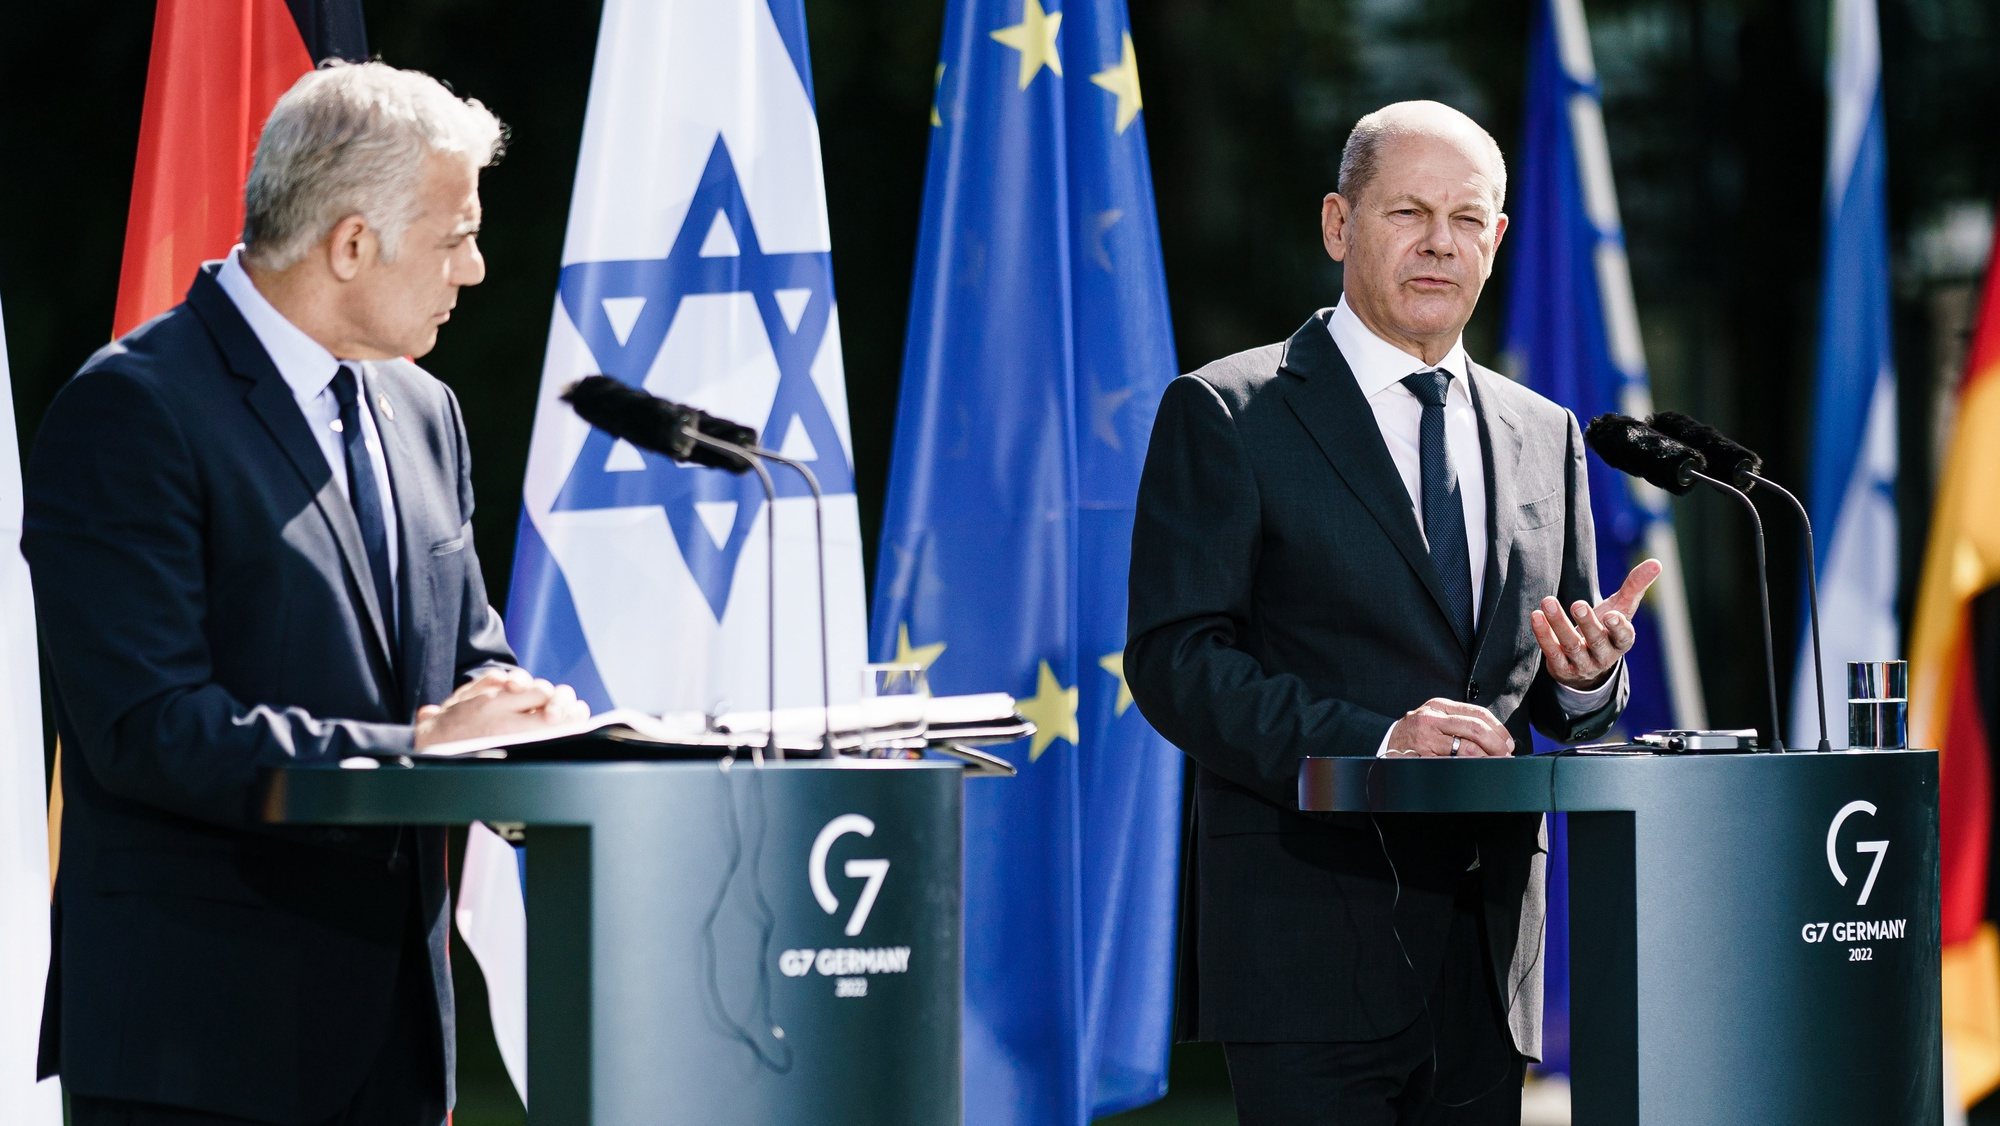 epa10179674 German Chancellor Olaf Scholz (R) gestures as he speaks next to Israeli Prime Minister Yair Lapid (L) during a joint press conference at the chancellery in Berlin, Germany, 12 September 2022. German Chancellor Olaf Scholz and Israeli Prime Minister Yair Lapid met for bilateral talks.  EPA/CLEMENS BILAN